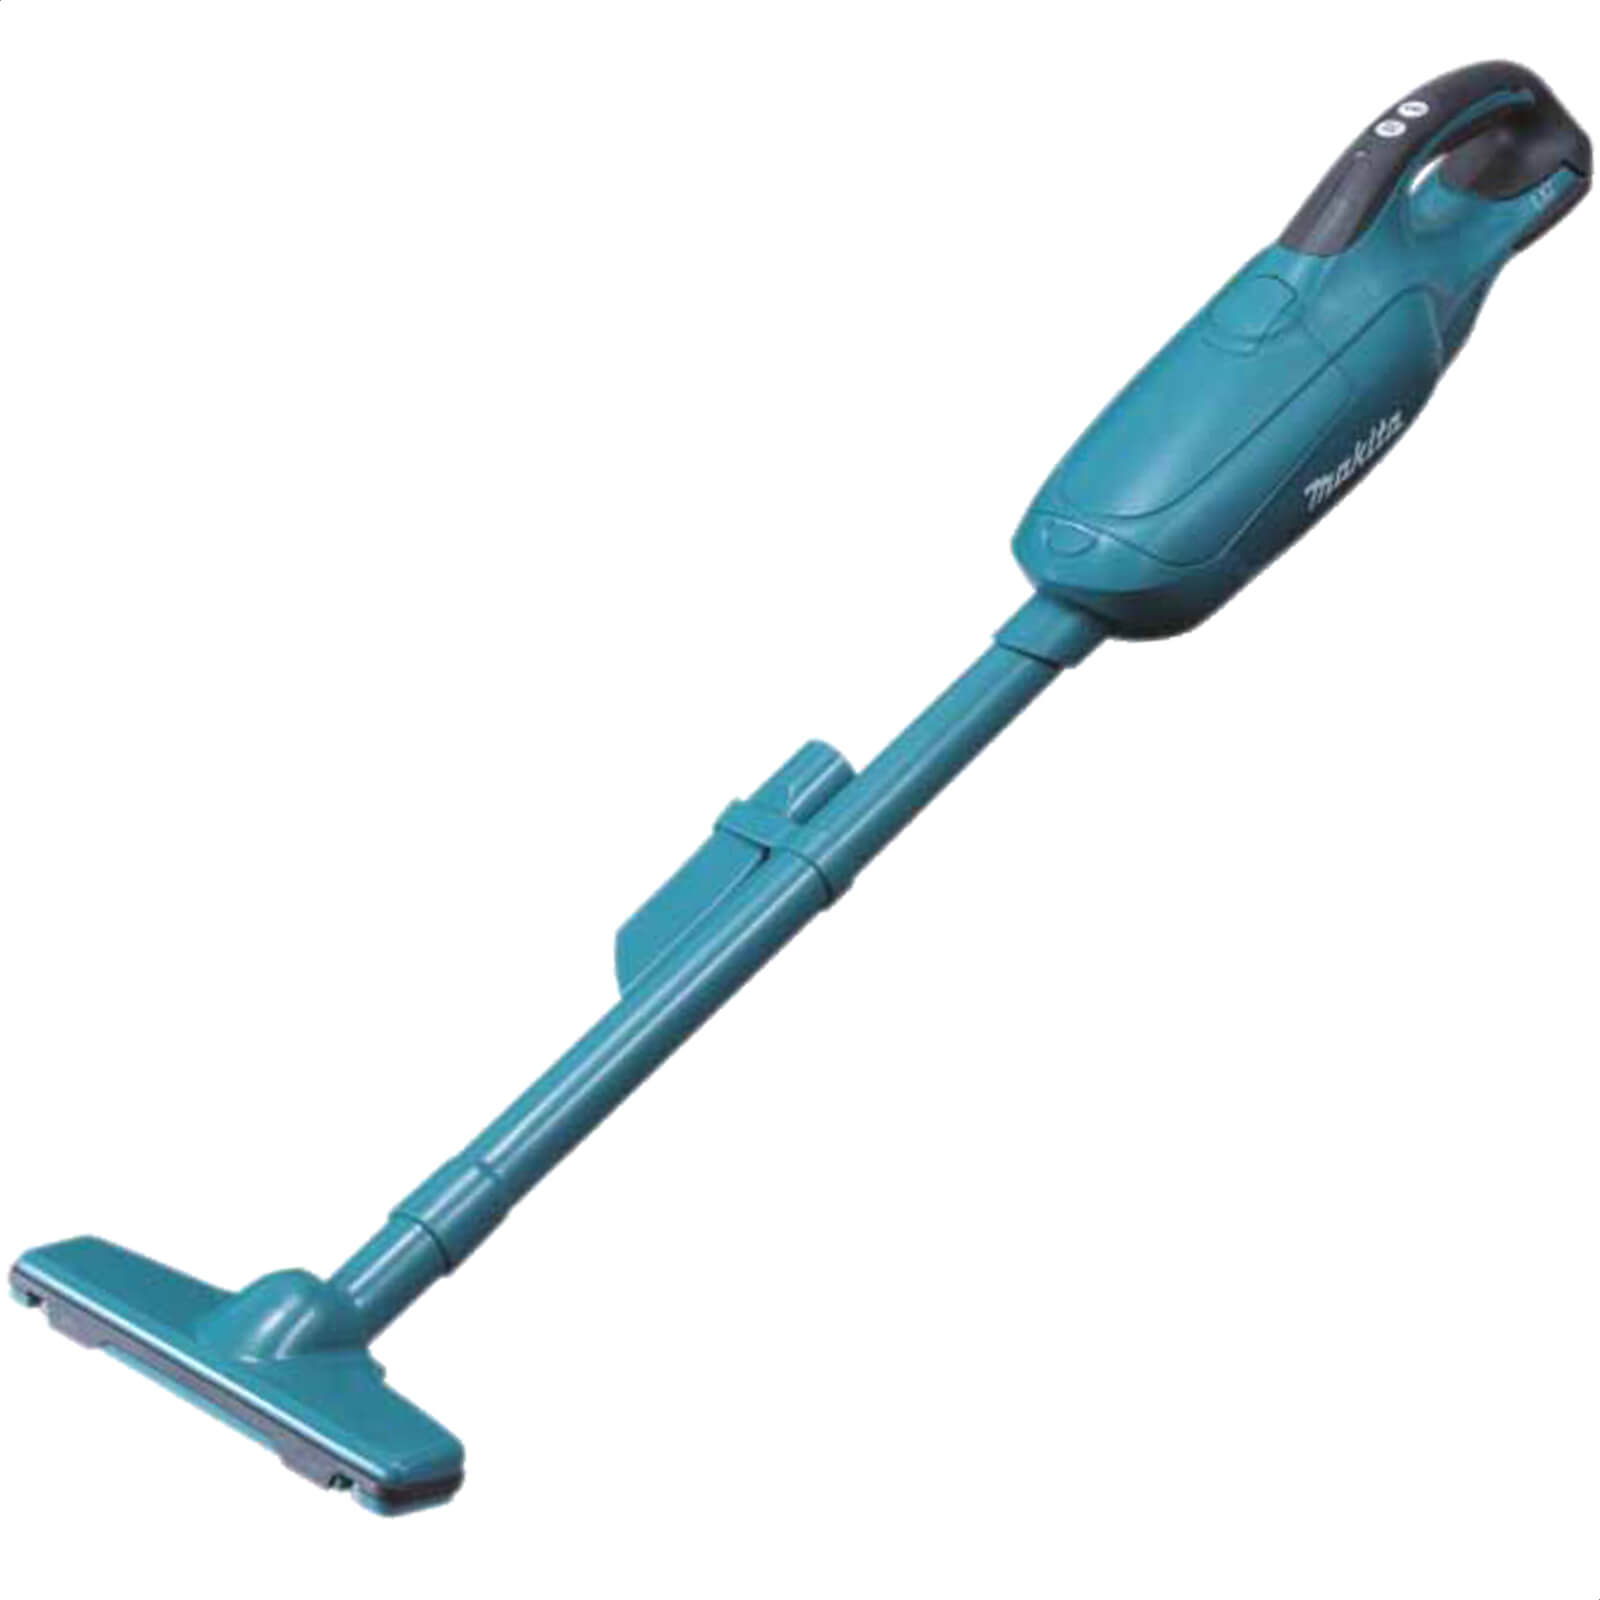 Makita DCL182 18v LXT Cordless Vacuum Cleaner No Batteries No Charger